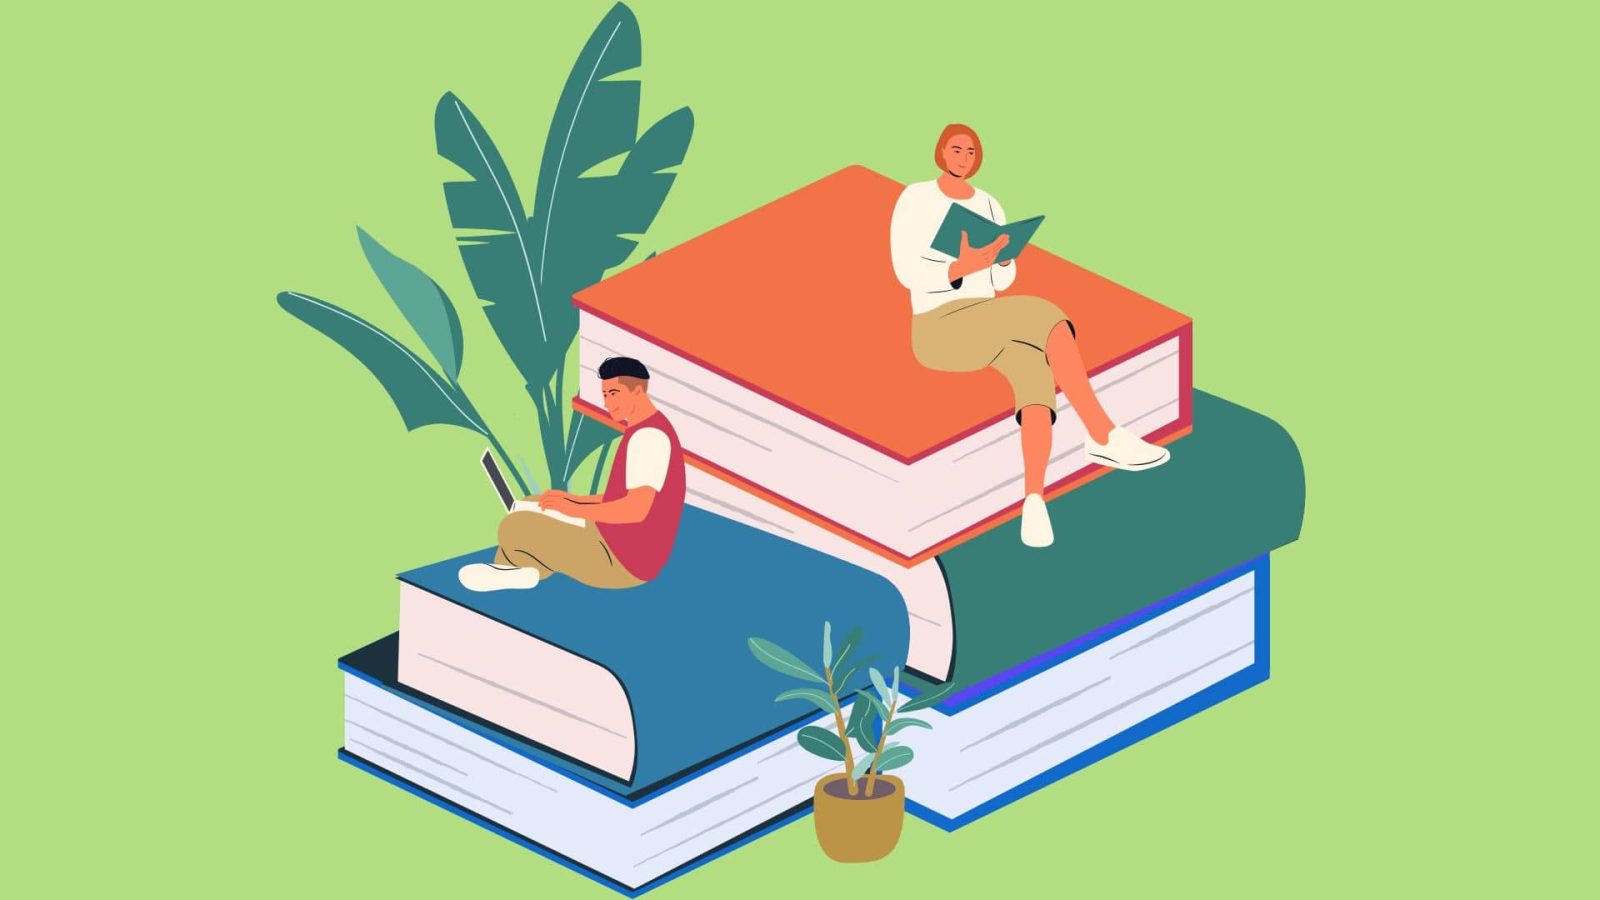 A green background with a big stack of colorful books and green plants in front of it. There are two people reading books on different levels of the stack